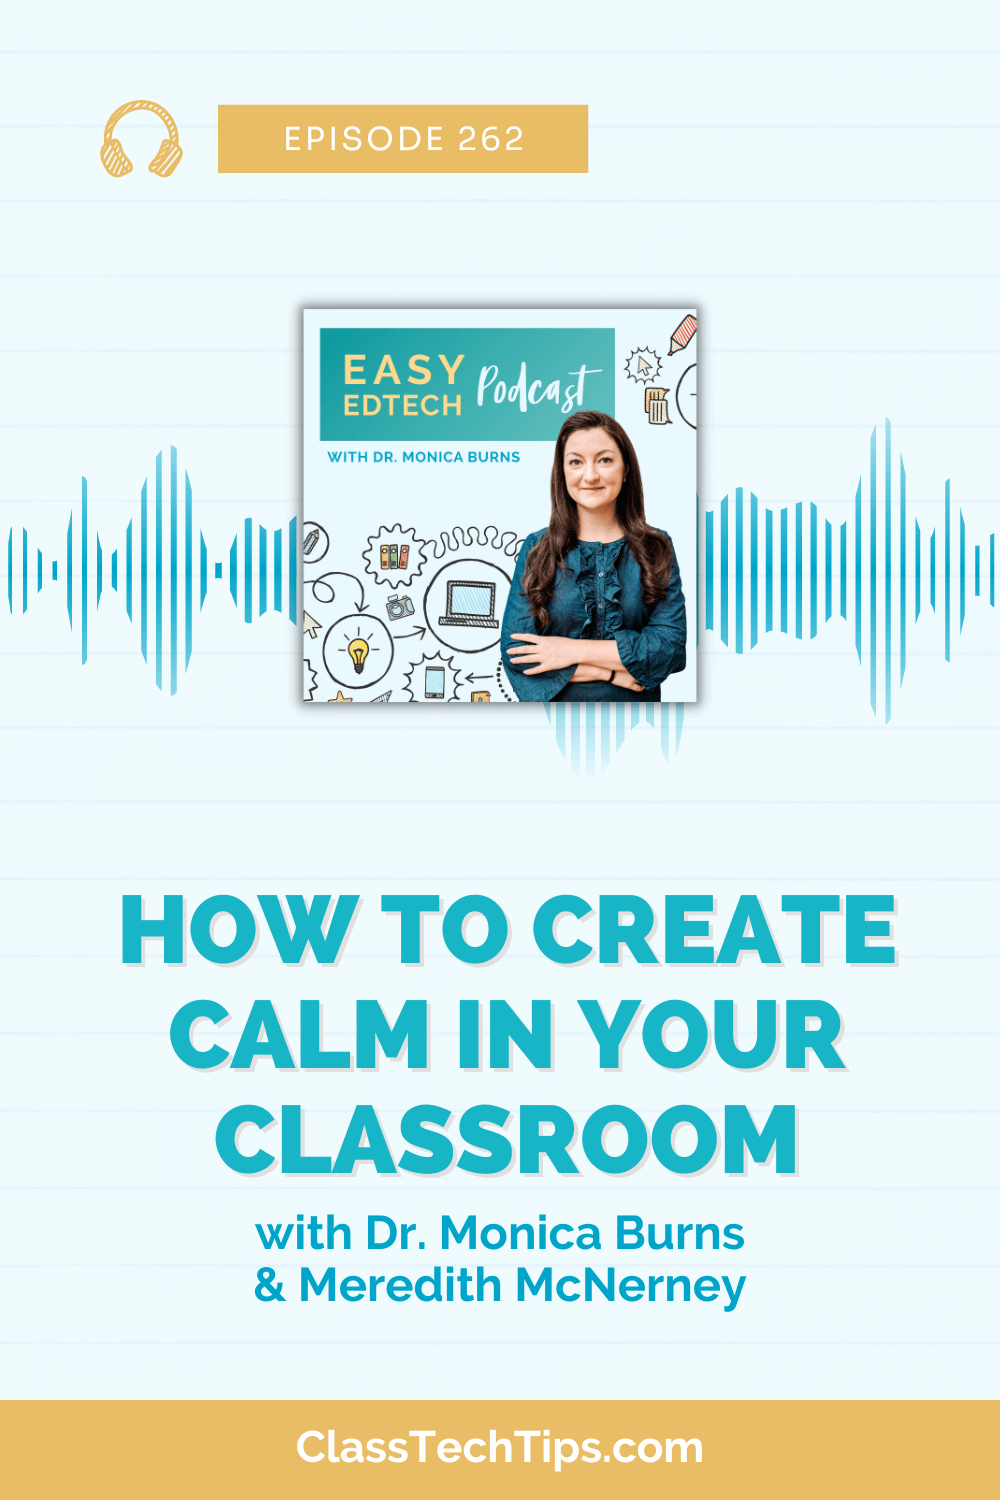 Promotional image for Easy EdTech Podcast Episode 262 featuring Dr. Monica Burns. The graphic includes a photo of Dr. Monica Burns, a sound wave design, and illustrations of educational icons like a laptop and pencils. Text reads "How to Create Calm in Your Classroom with Dr. Monica Burns & Meredith McNerney."